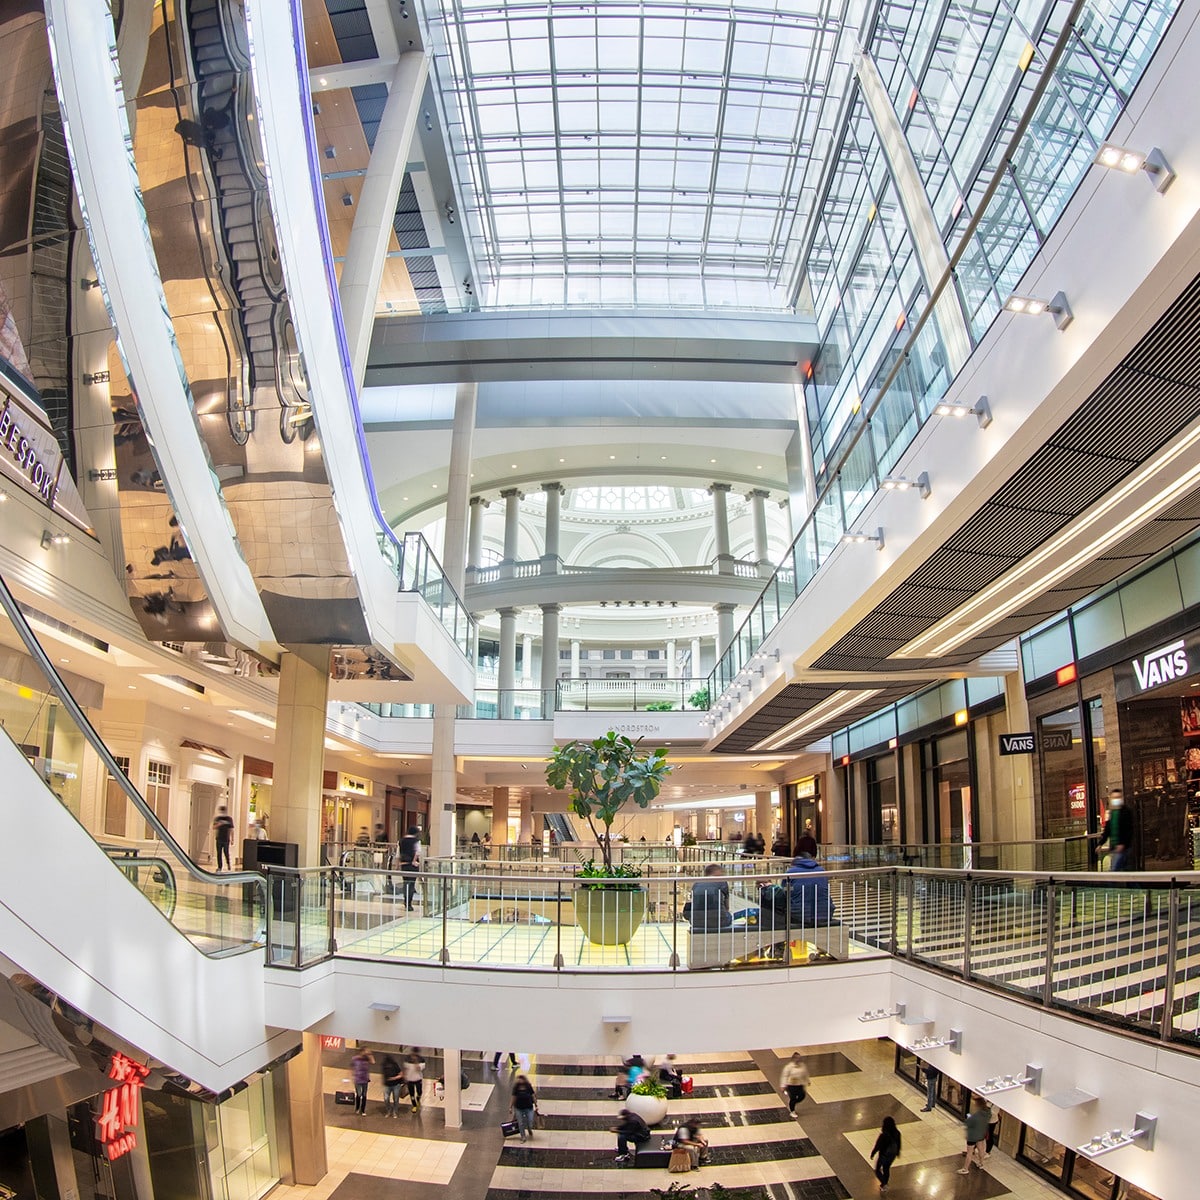 Interior of Westfield SF Centre mall with a large skylight and multiple floors lined with stores.